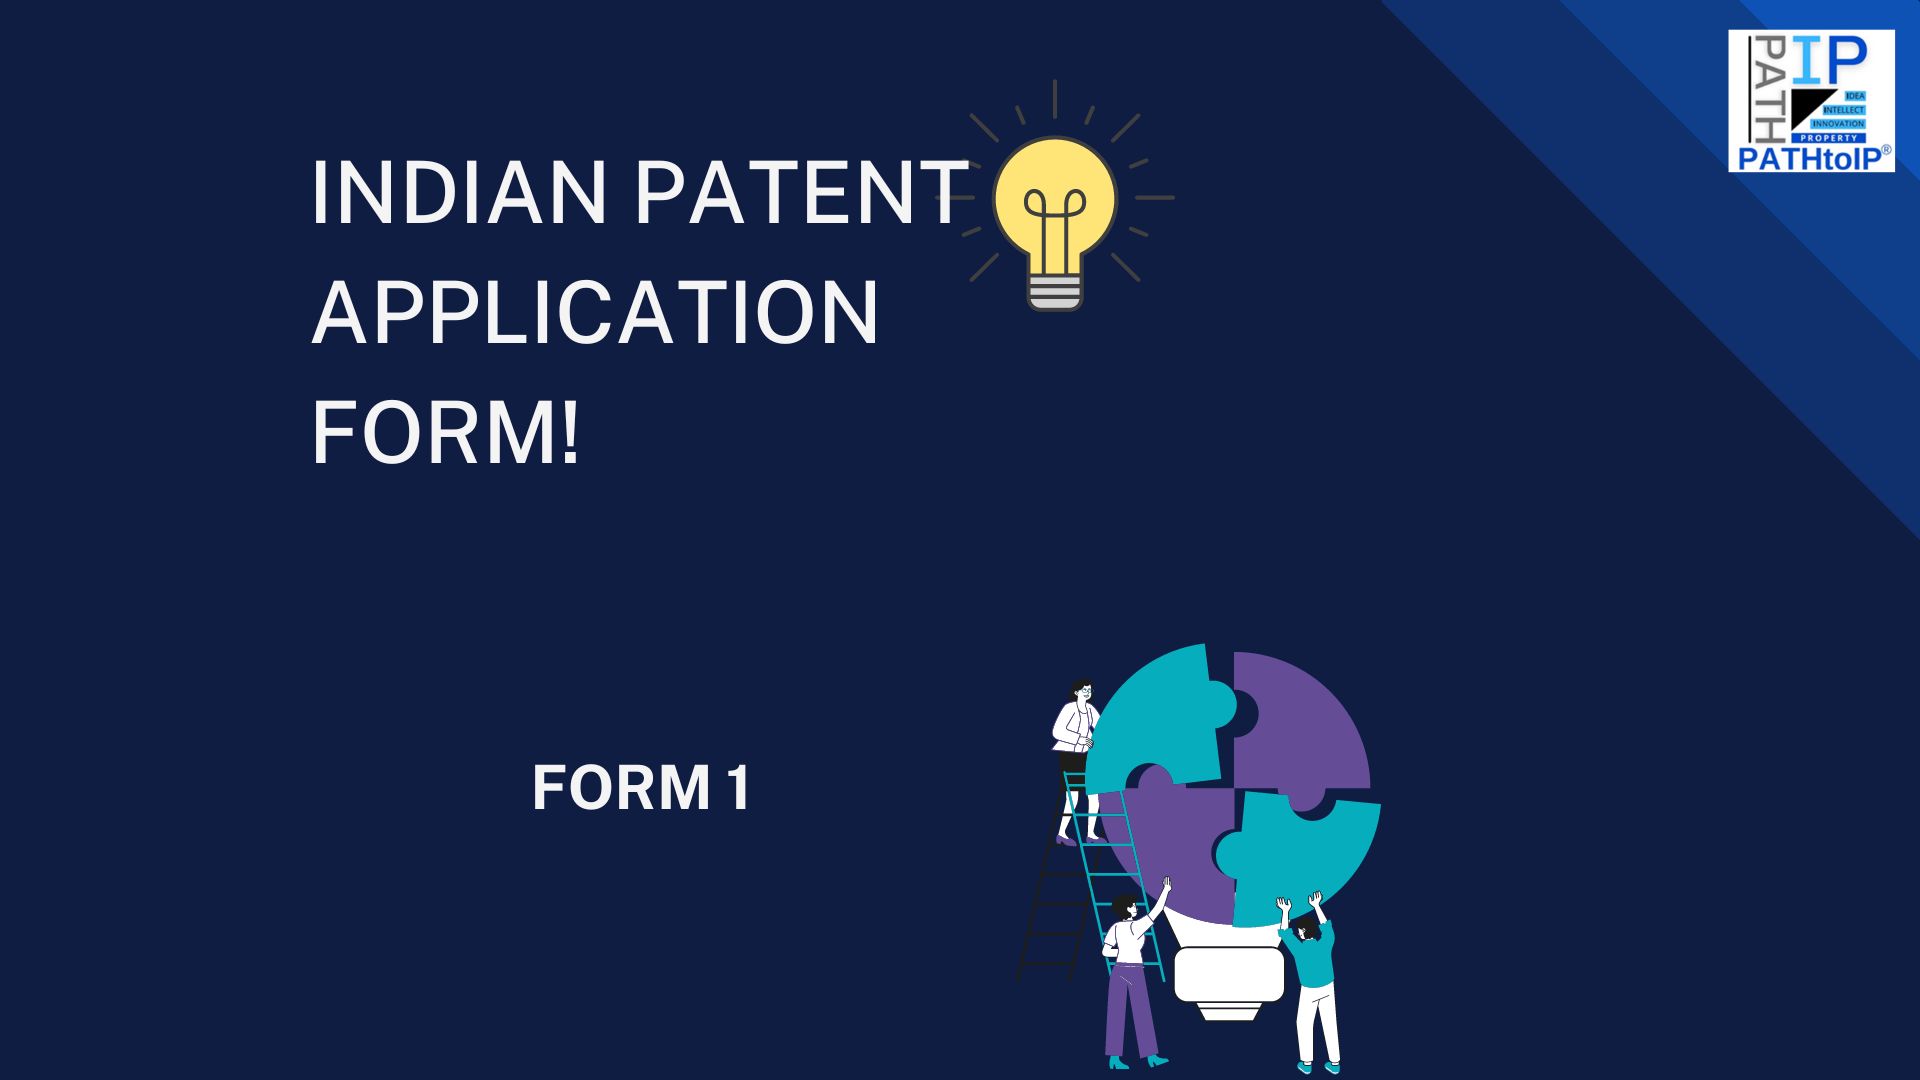 Indian Patent Forms: FORM 1